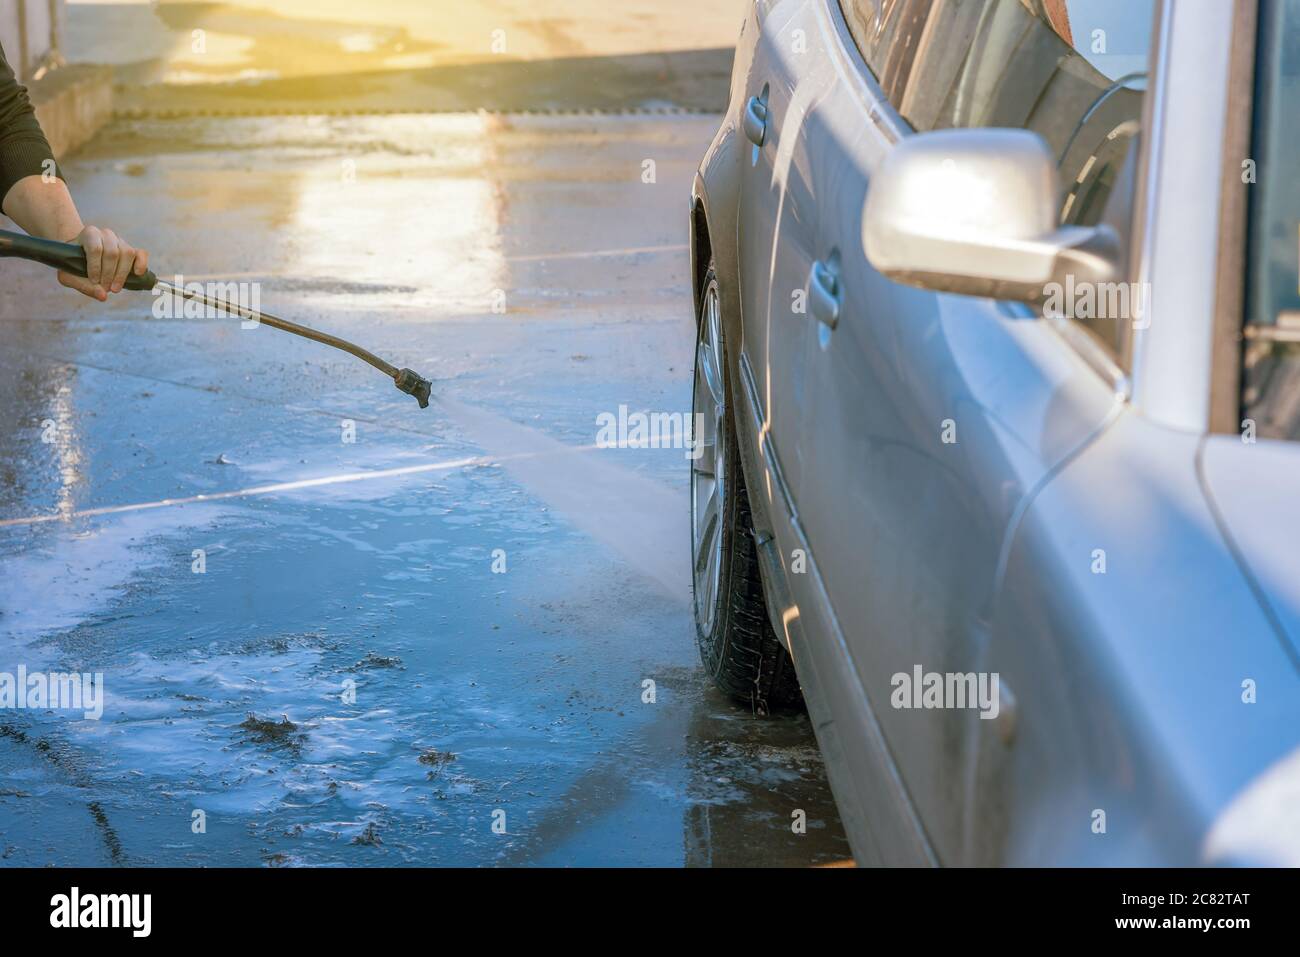 Car washing with flowing water. Outdoor Self Service Cleaning Car Using High Pressure Water Stock Photo